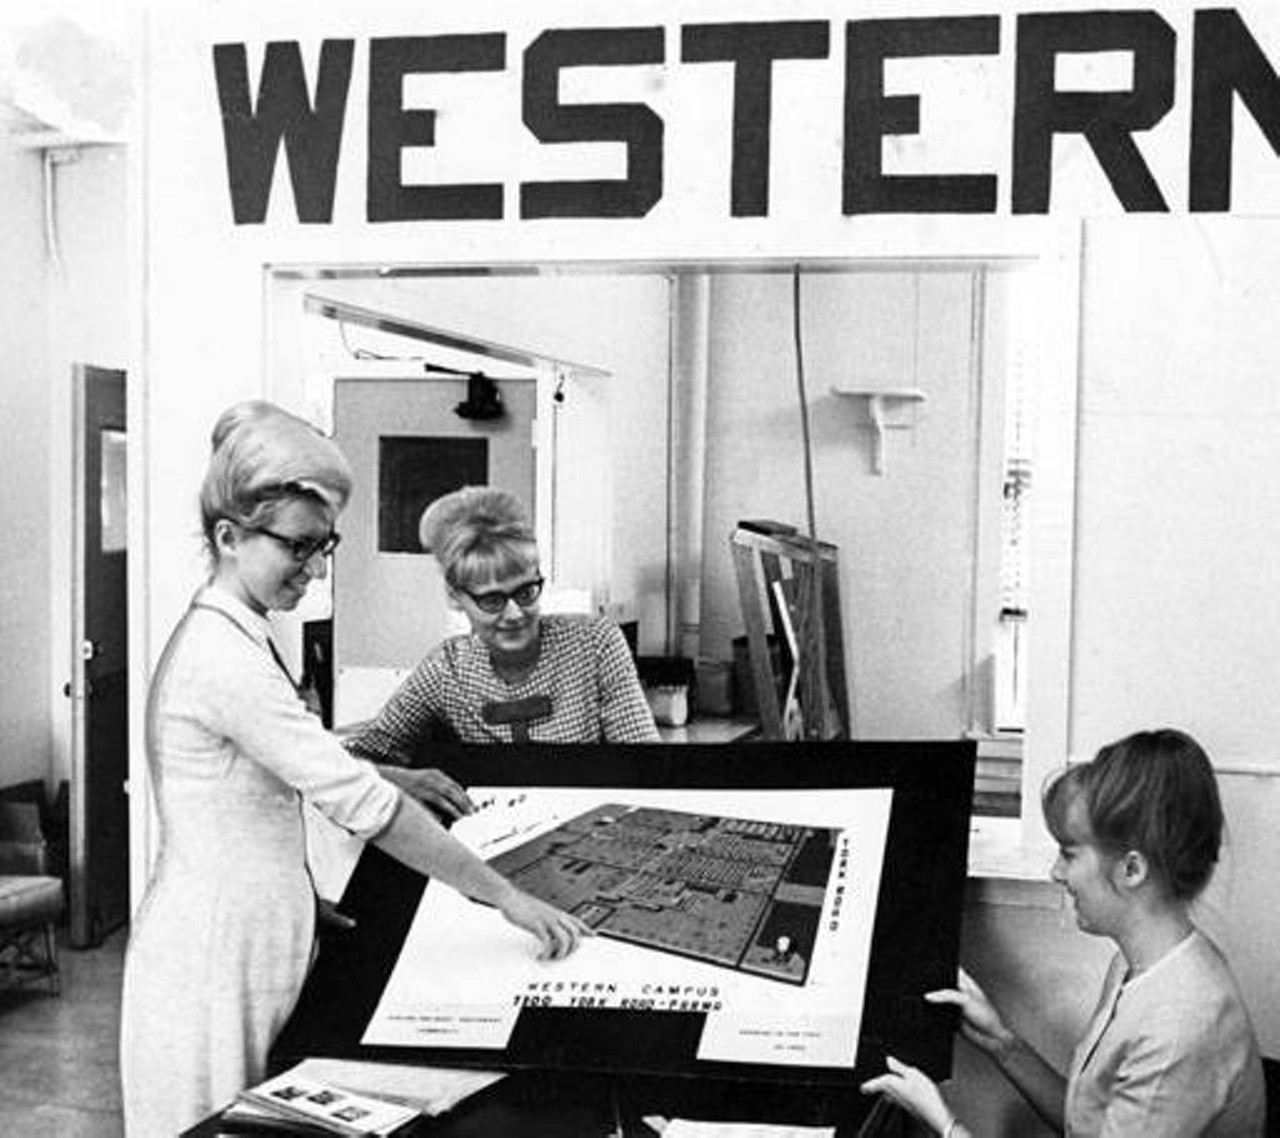 Female students looking at map and layout of Cuyahoga Community College West, 1966.